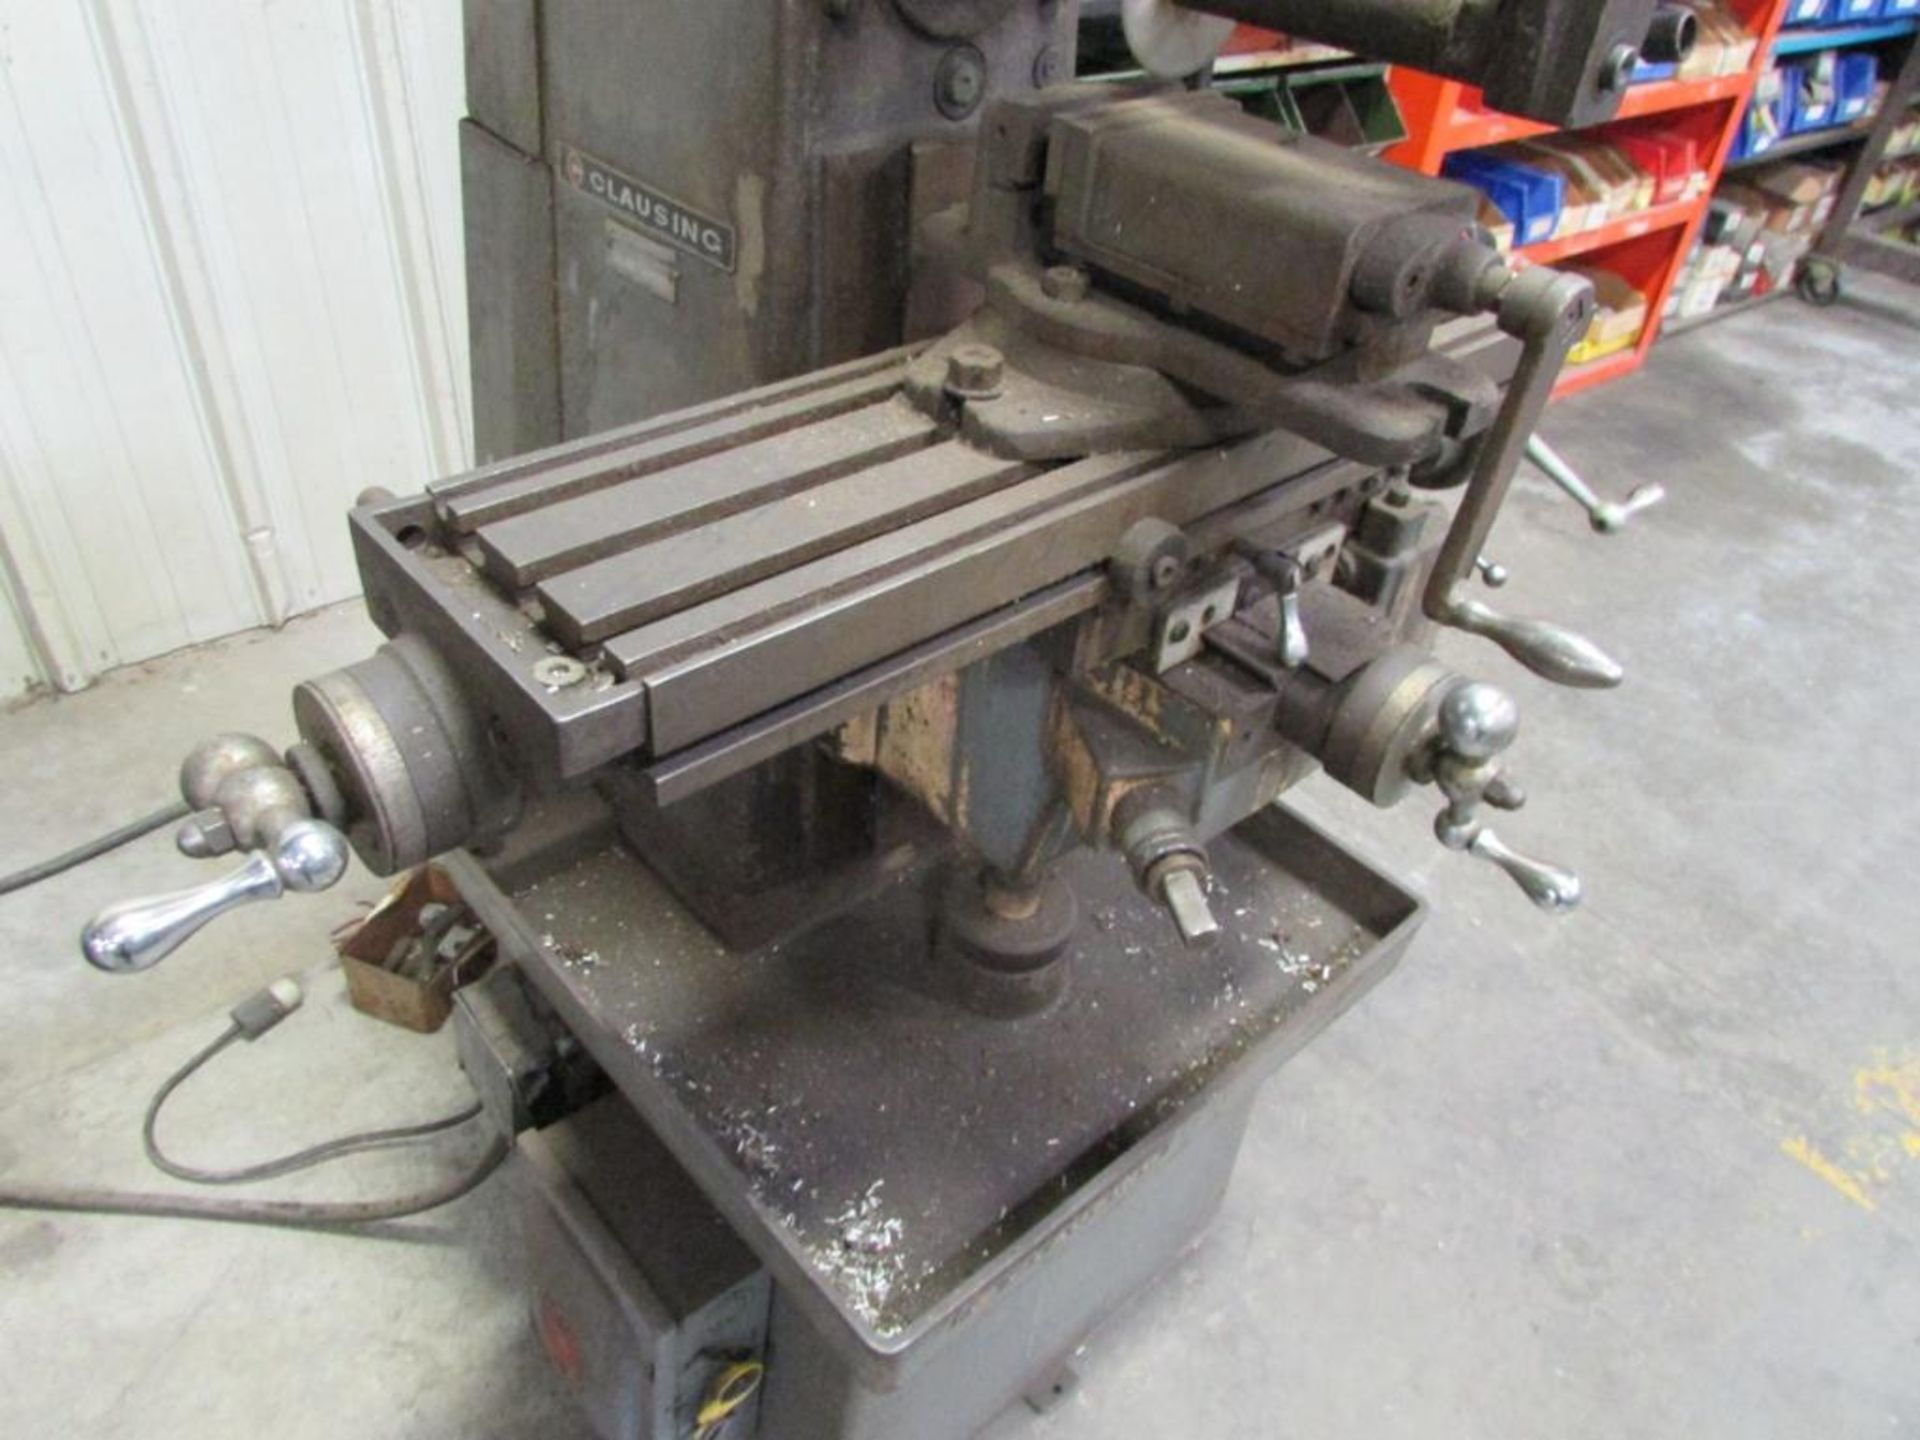 Clausing 8540 Horizontal Mill, 26" x 6.75" Table, Table Power Feed with Variable Feed Control, 4.25: - Image 3 of 7